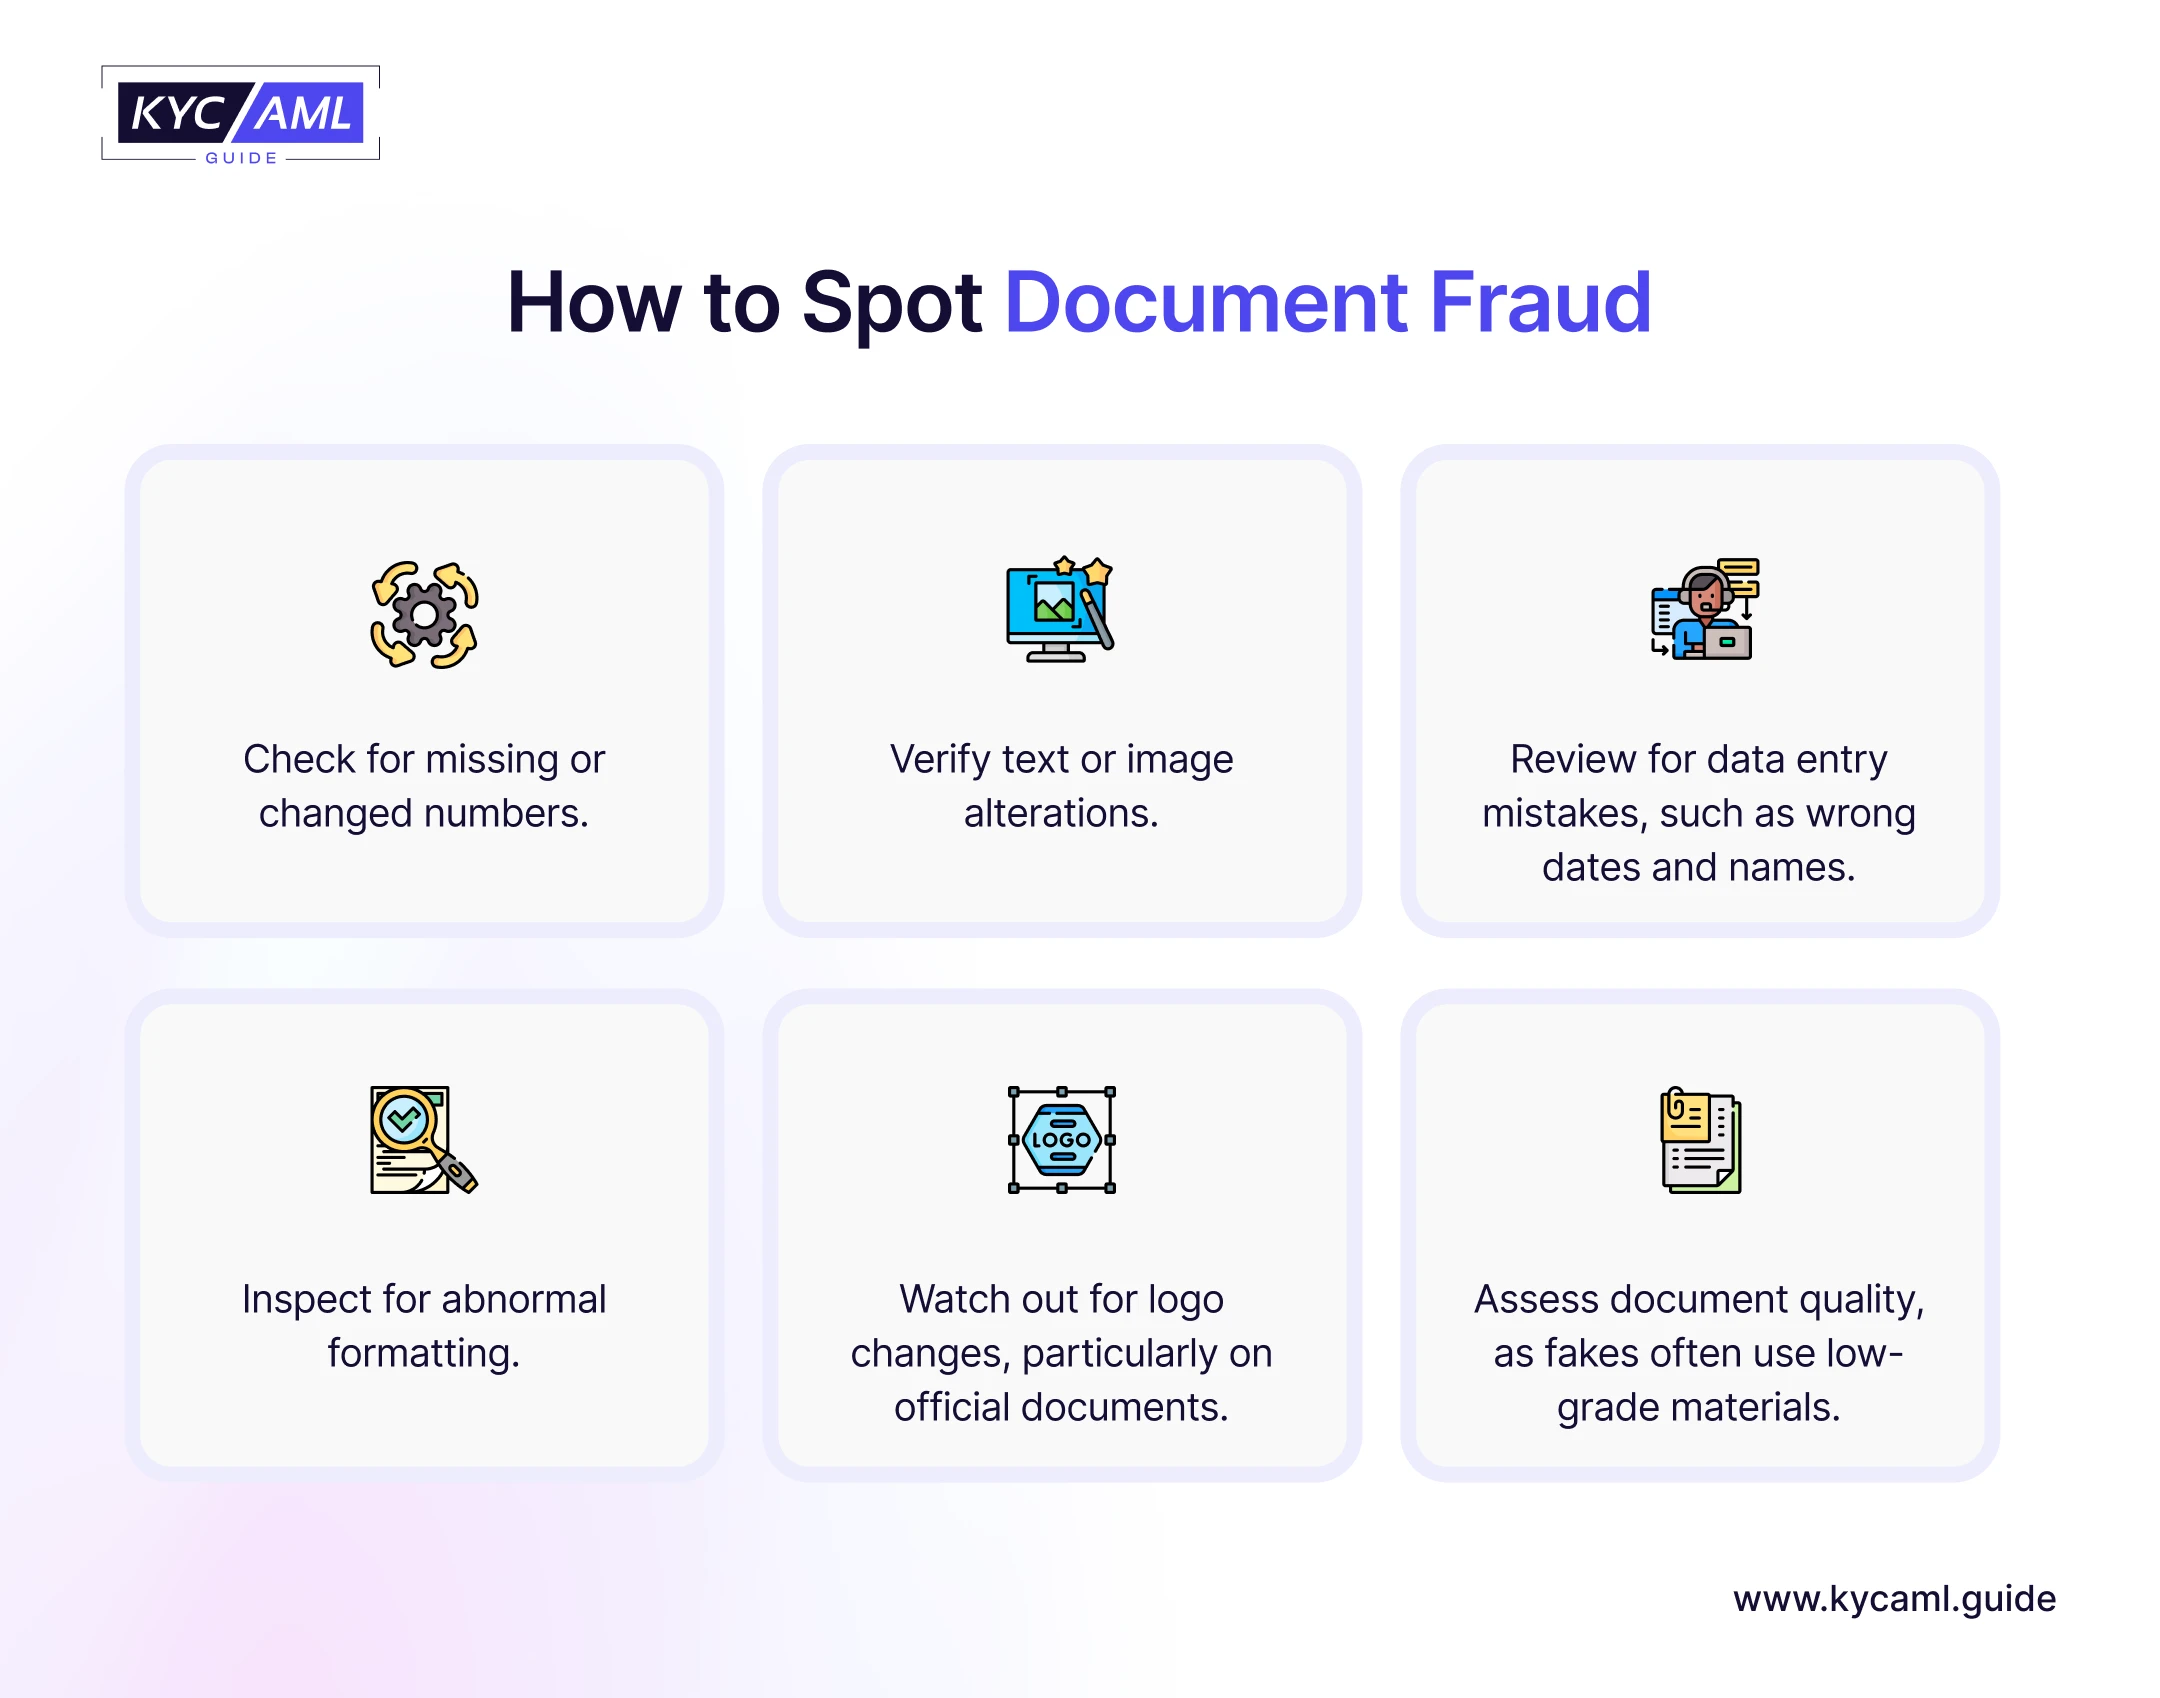 How to Spot Document Fraud